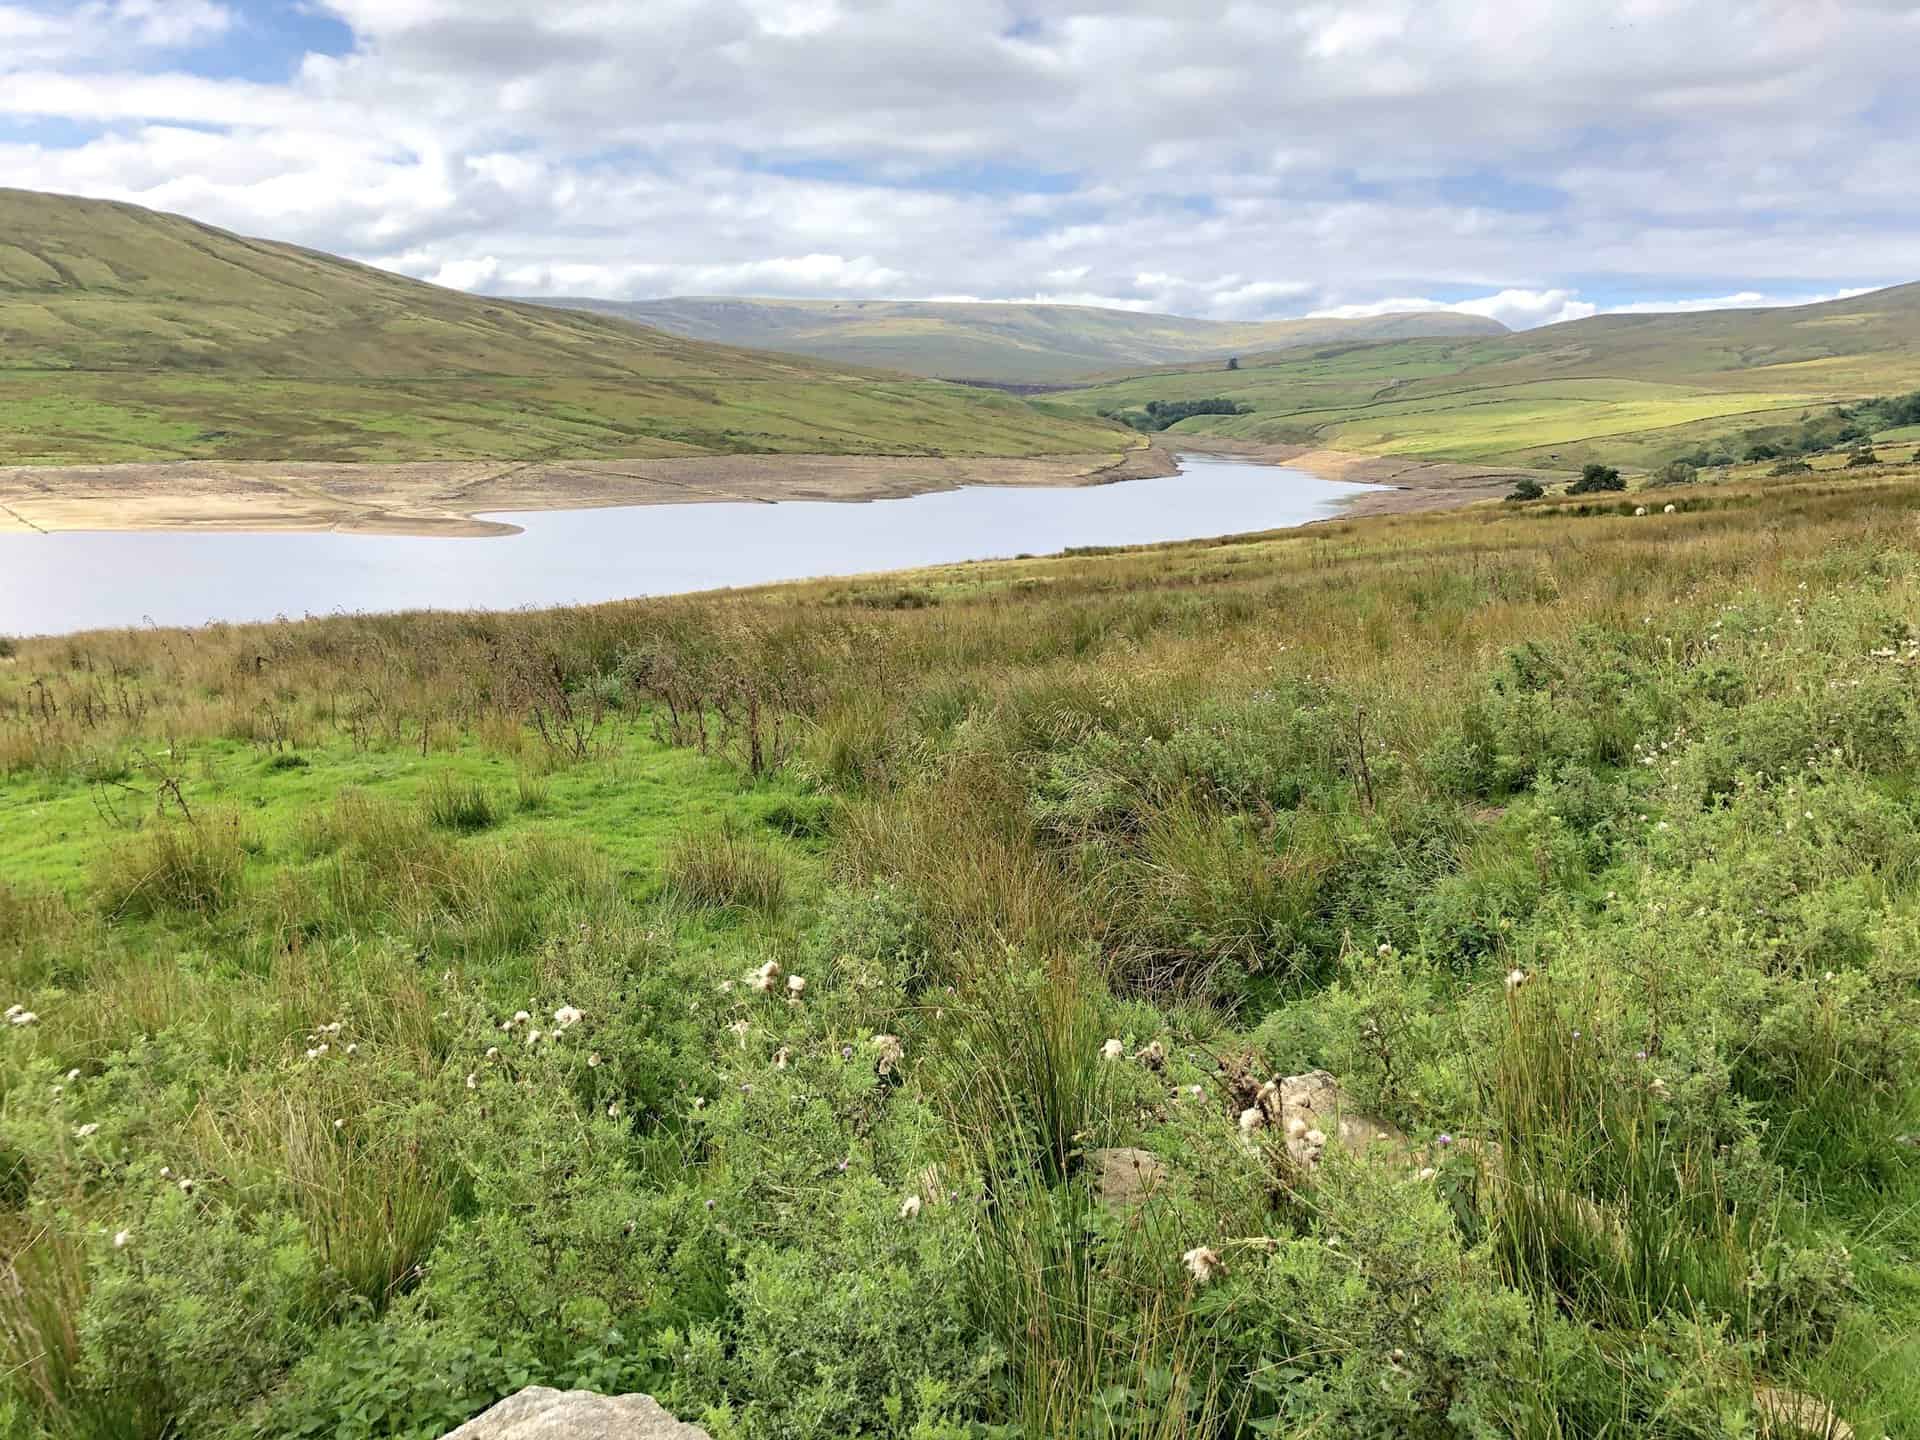 The western end of Scar House Reservoir, with Great Whernside in the background. The halfway point of this Nidderdale Way walk.